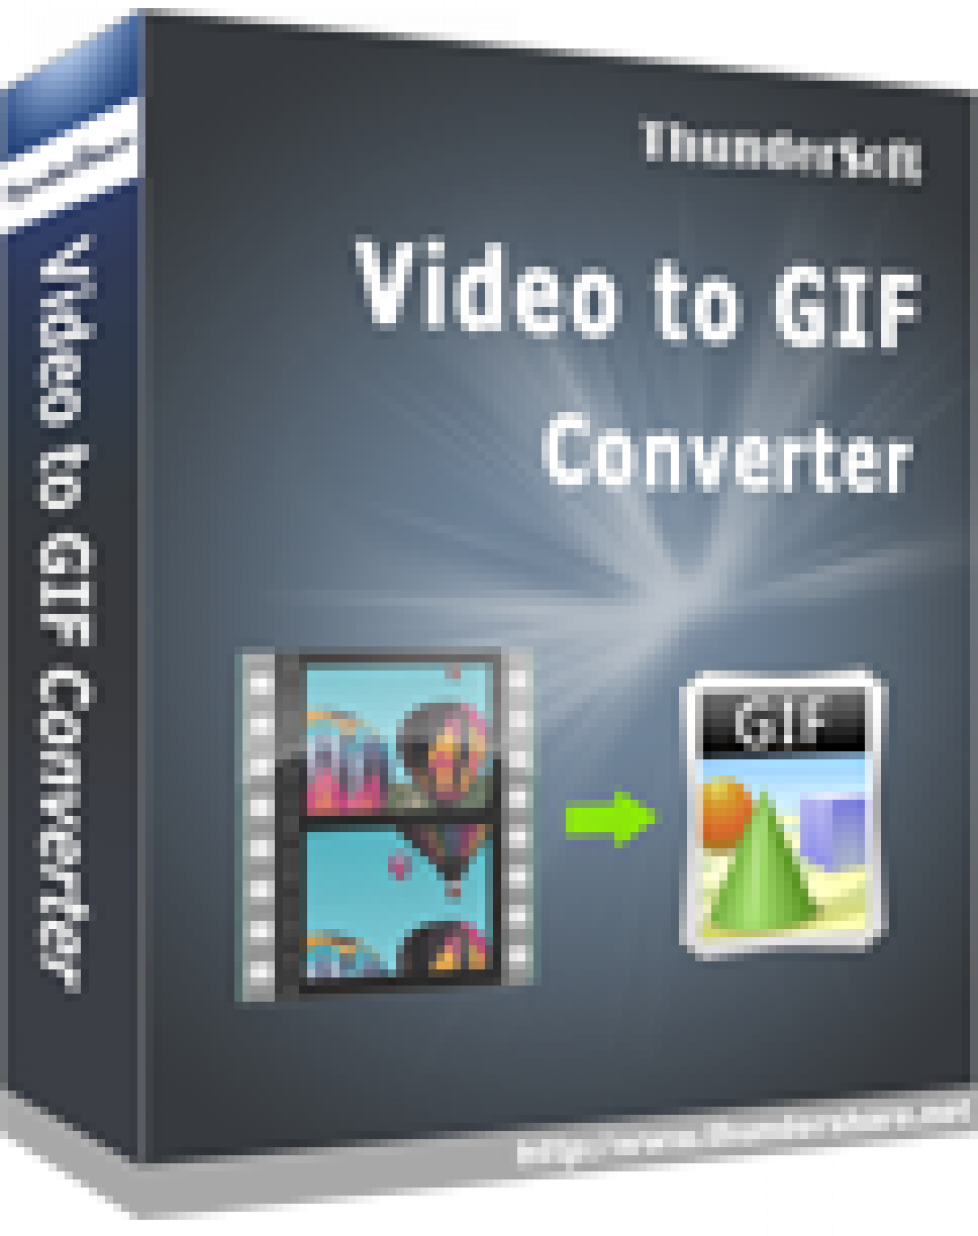 ThunderSoft GIF Converter 5.2.0 download the last version for iphone